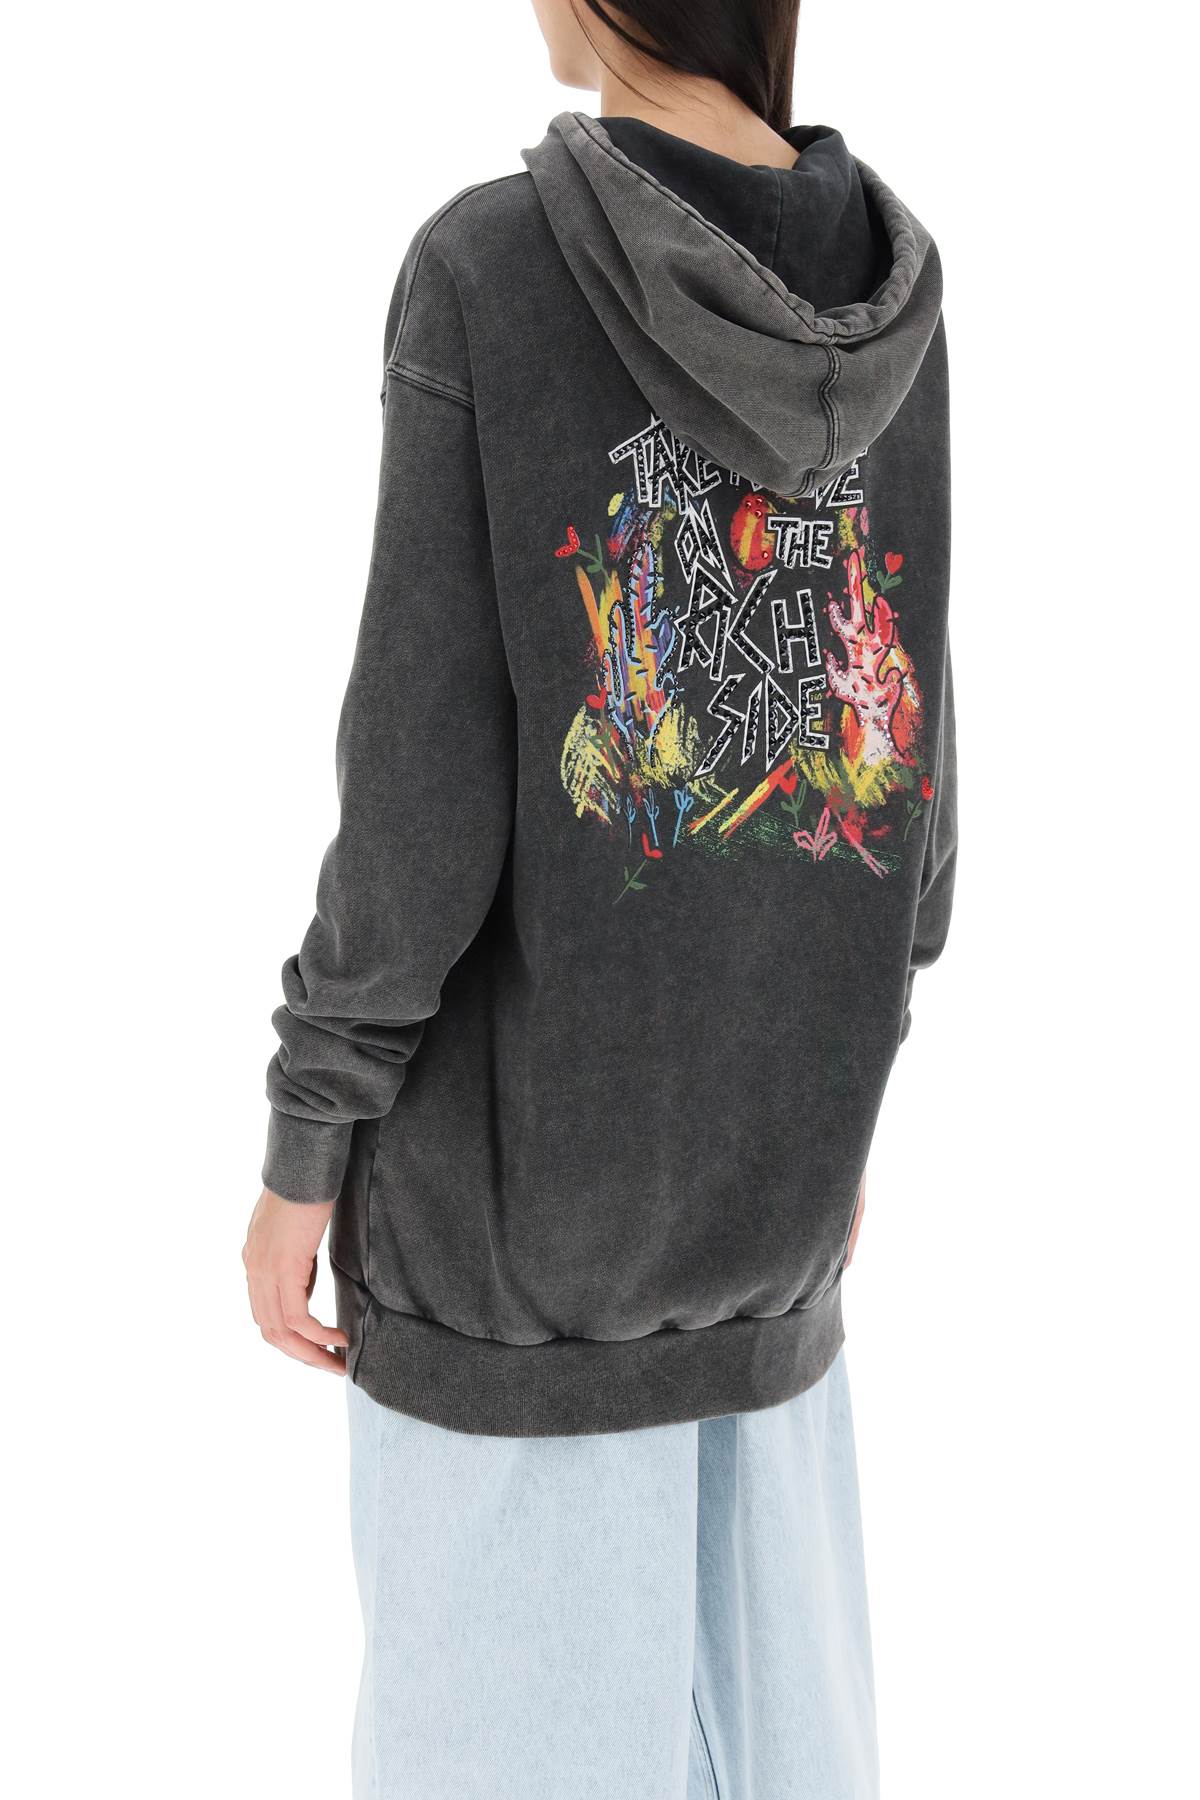 Alessandra rich oversized hoodie with print and rhinestones-2